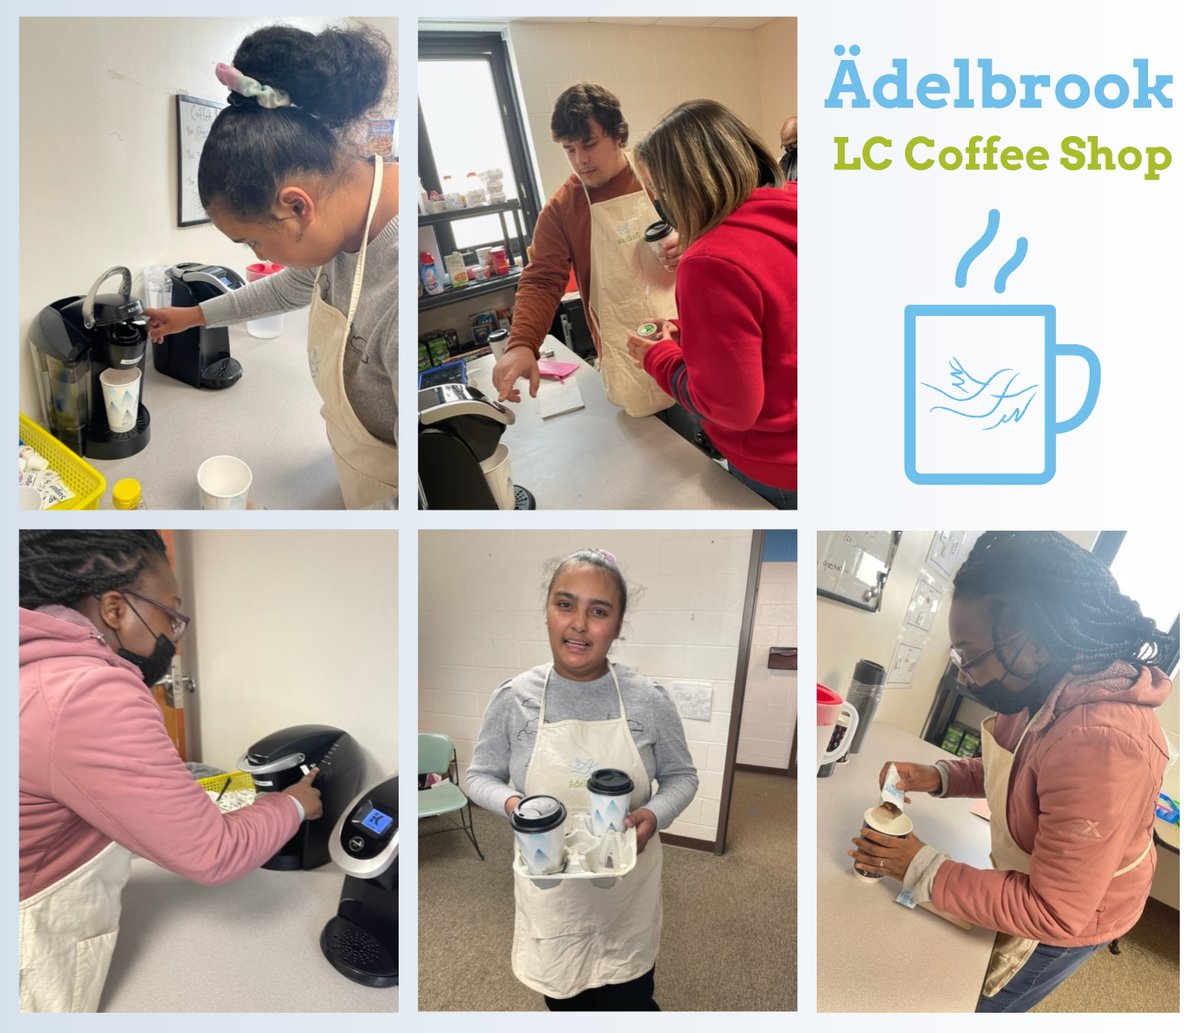 Students on our Cromwell Campus are learning valuable job skills through the newly opened Ädelbrook LC Coffee Shop! The shop allows our individuals to gain independence and promotes their success in a campus-based vocational setting. 
#JobSkills #PromotingSuccess #Adelbrook